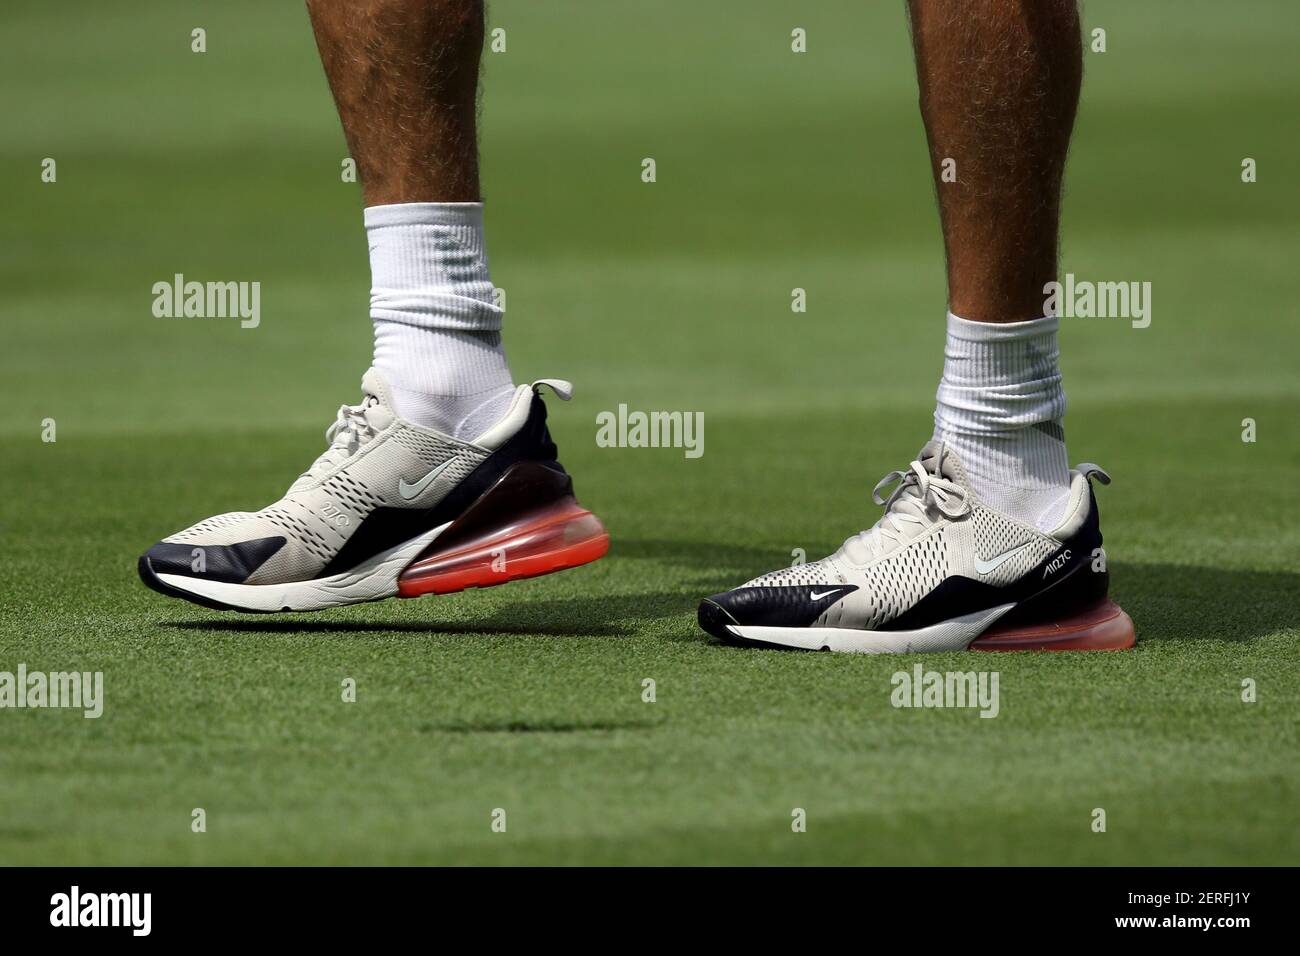 Aug 3, 2018; Akron, OH, USA; A view of the Nike Air Max 270s worn by Ian  Finnis, the caddie for Tommy Fleetwood, as he walks on the fourth hole  fairway during